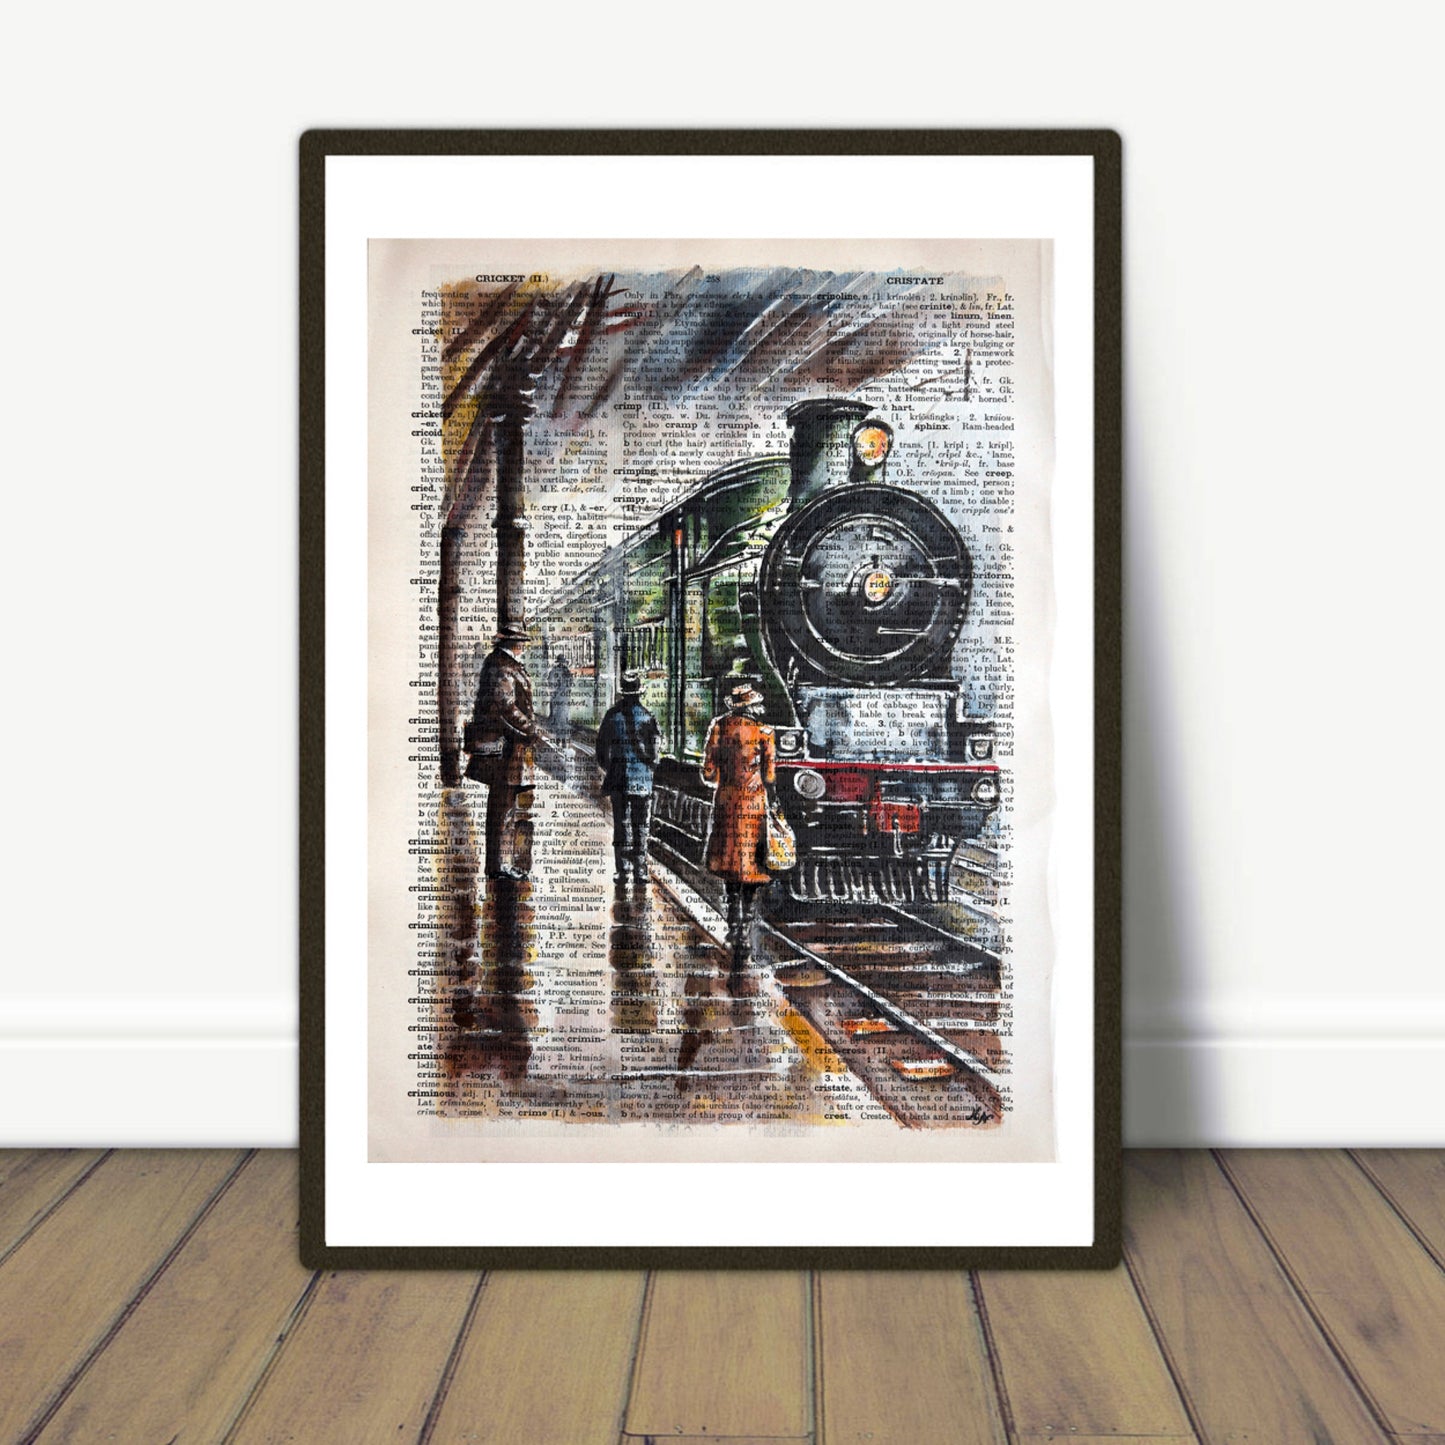 "Age of Steam" captures a misty train station scene on an upcycled vintage English dictionary page by Misty Lady.